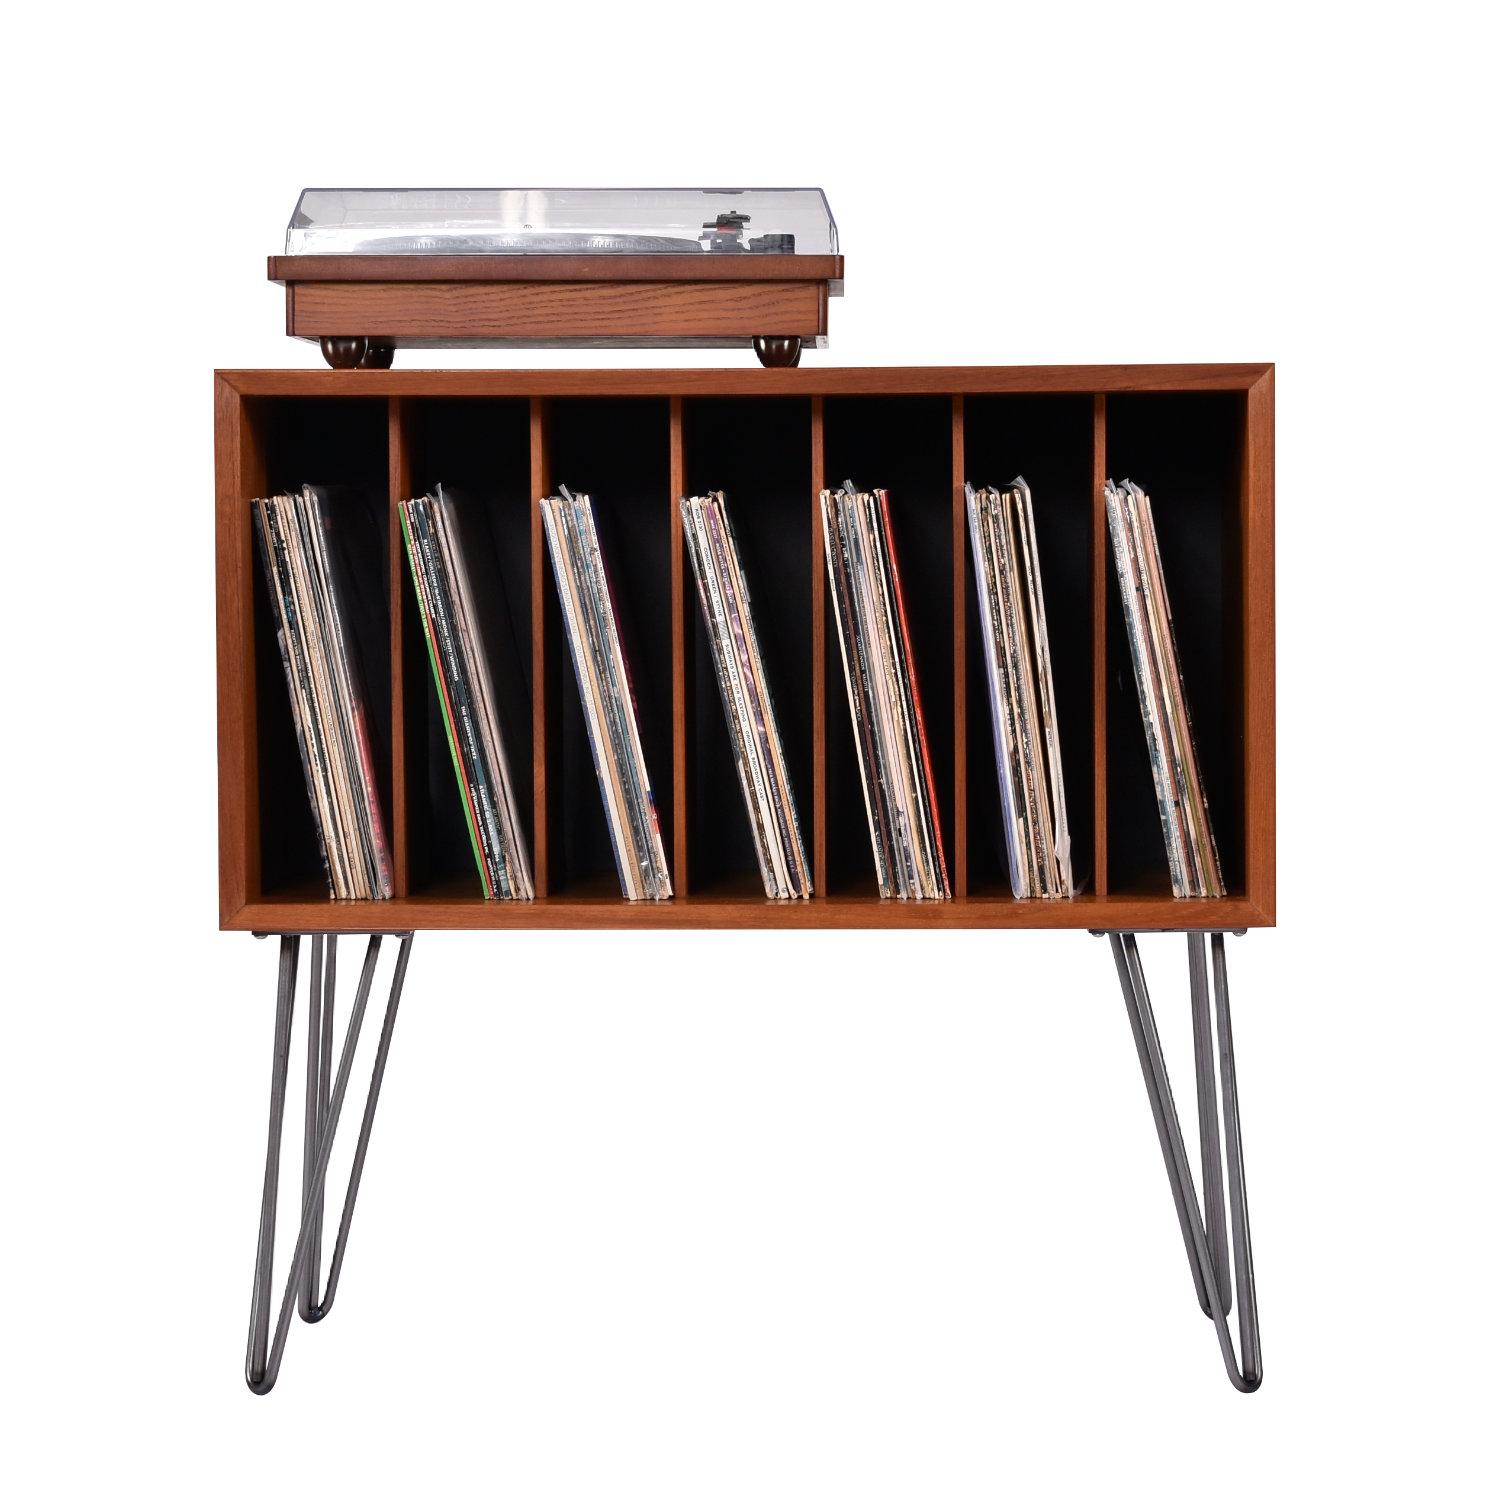 Stunning Poul Cadovius Danish teak record cabinet on hairpin legs.Our shop elevated (literally) this Cado Cabinet with a sleek set of 14? metal hairpin legs. Instead of going the easy route with screws, we opted to install 12 threaded insert nuts.